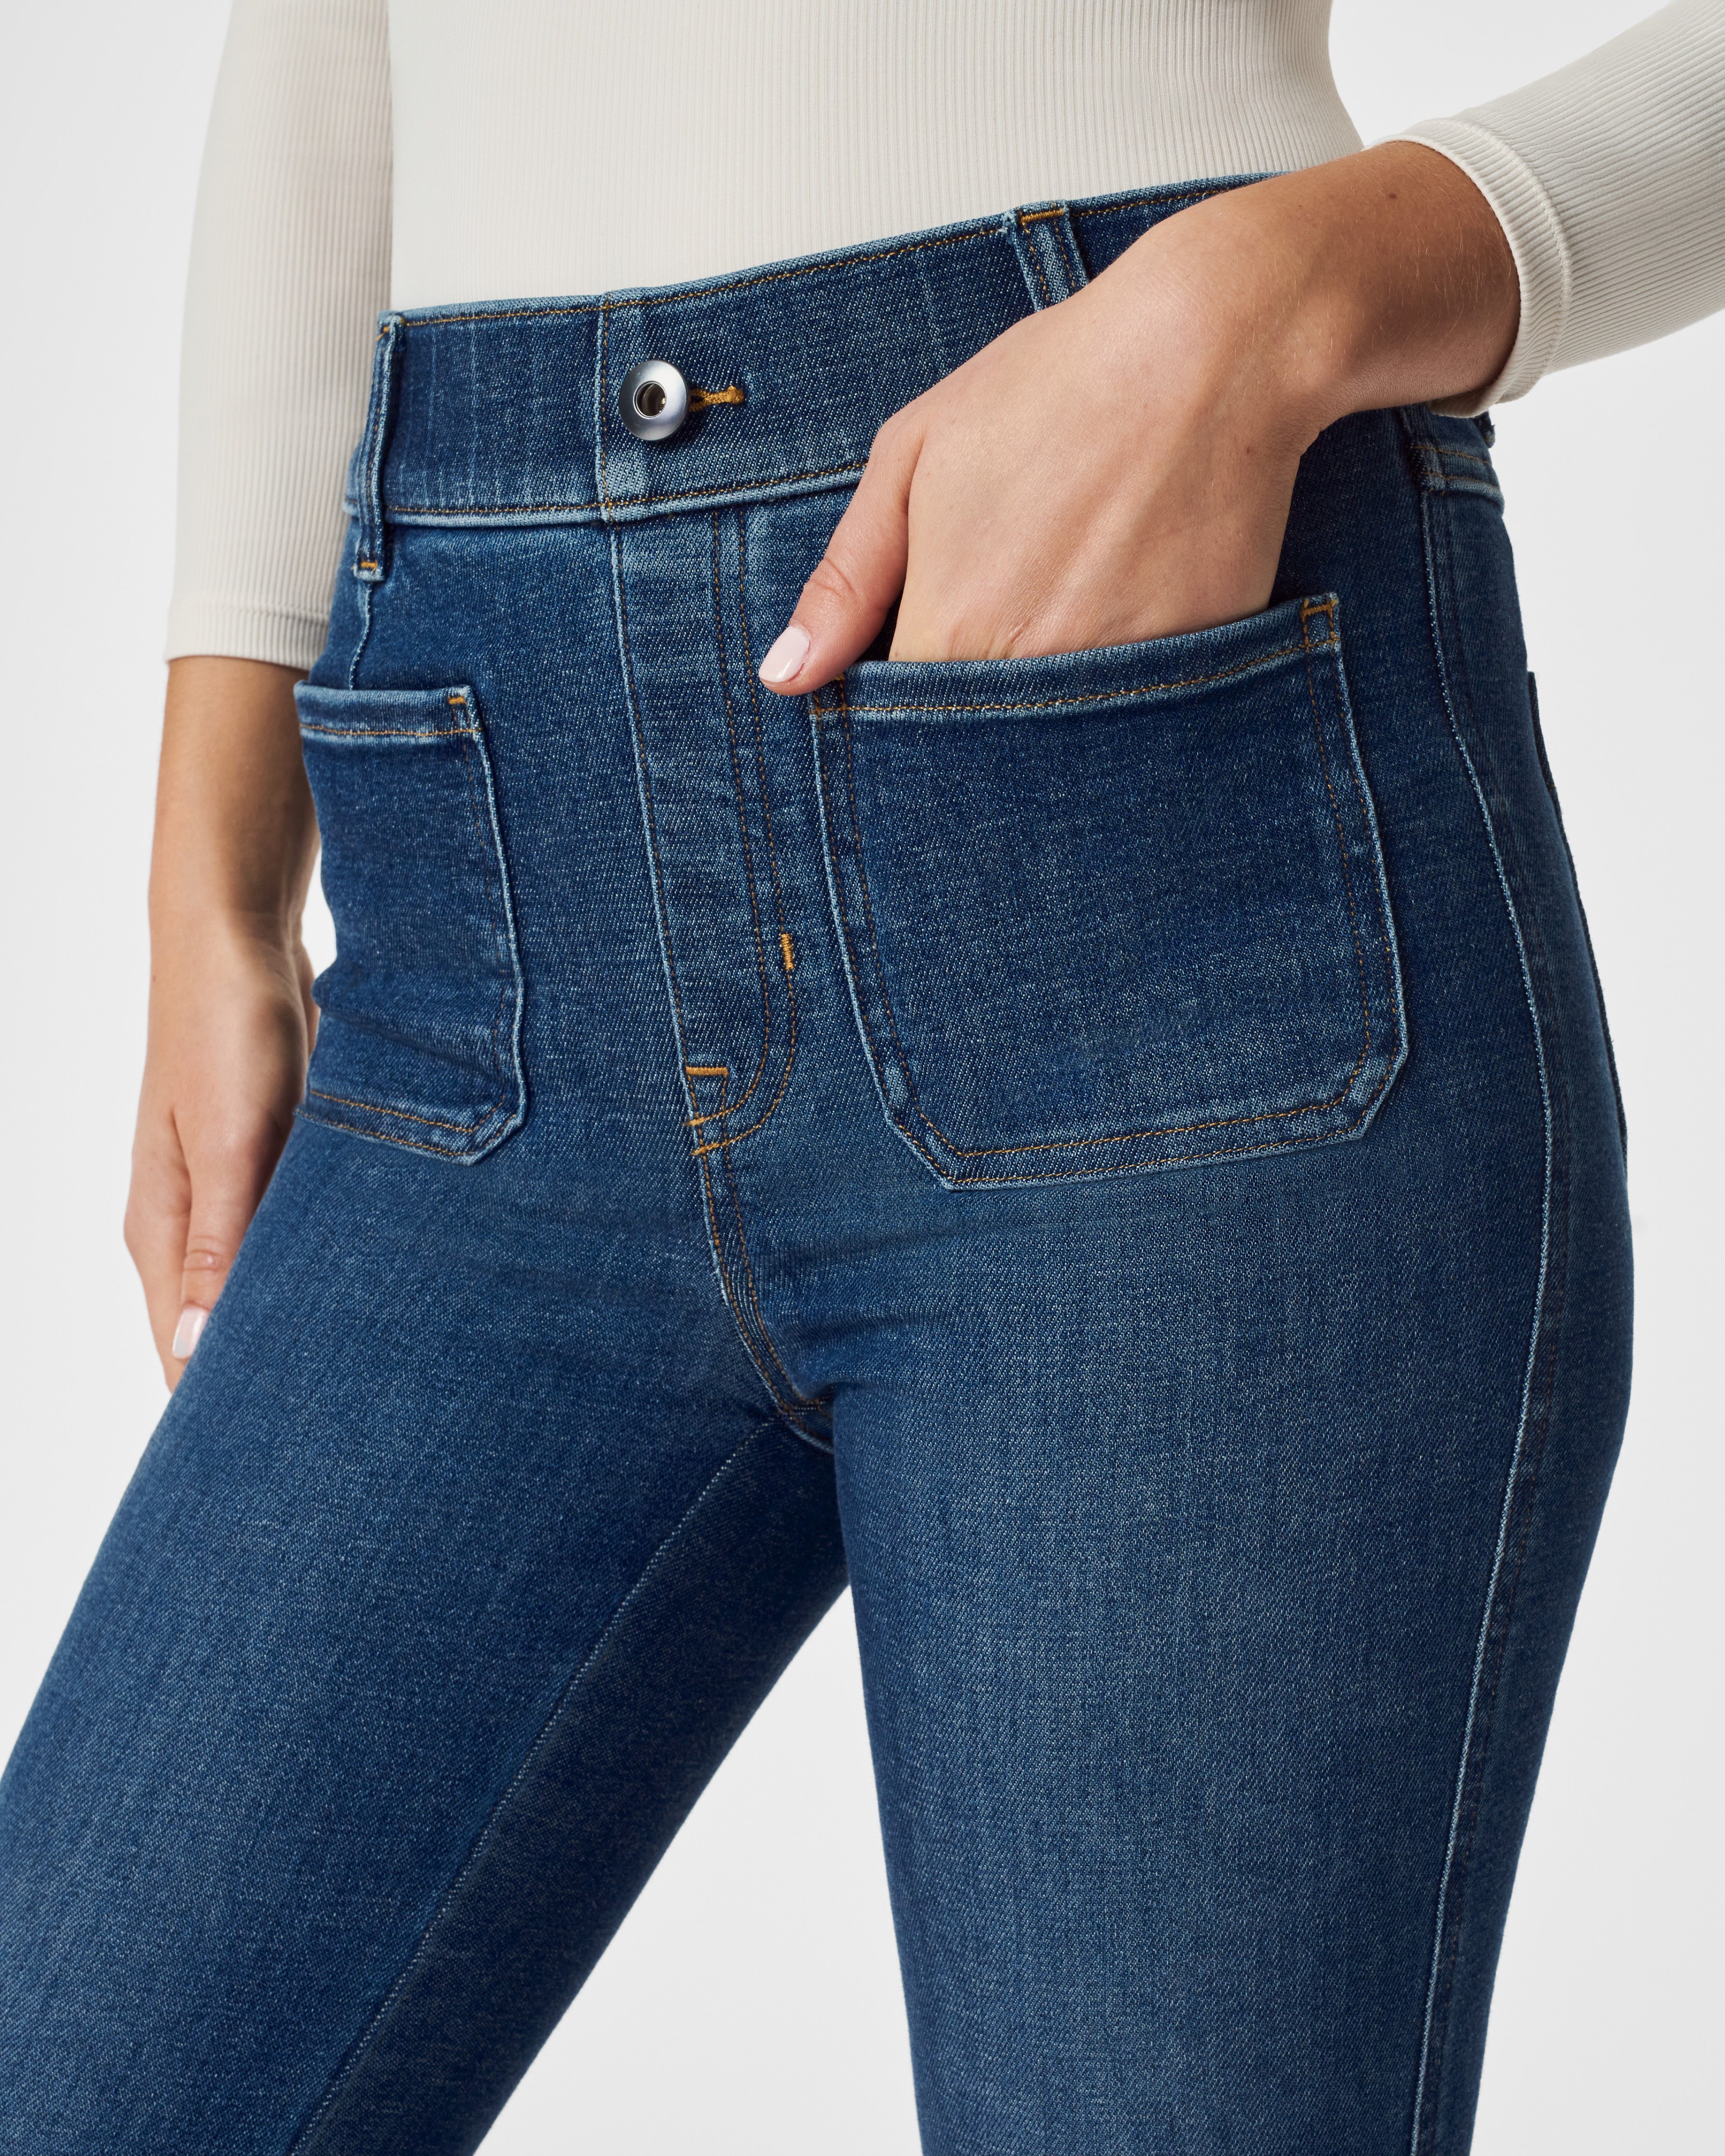 Spanx Flare Jeans - ShopperBoard